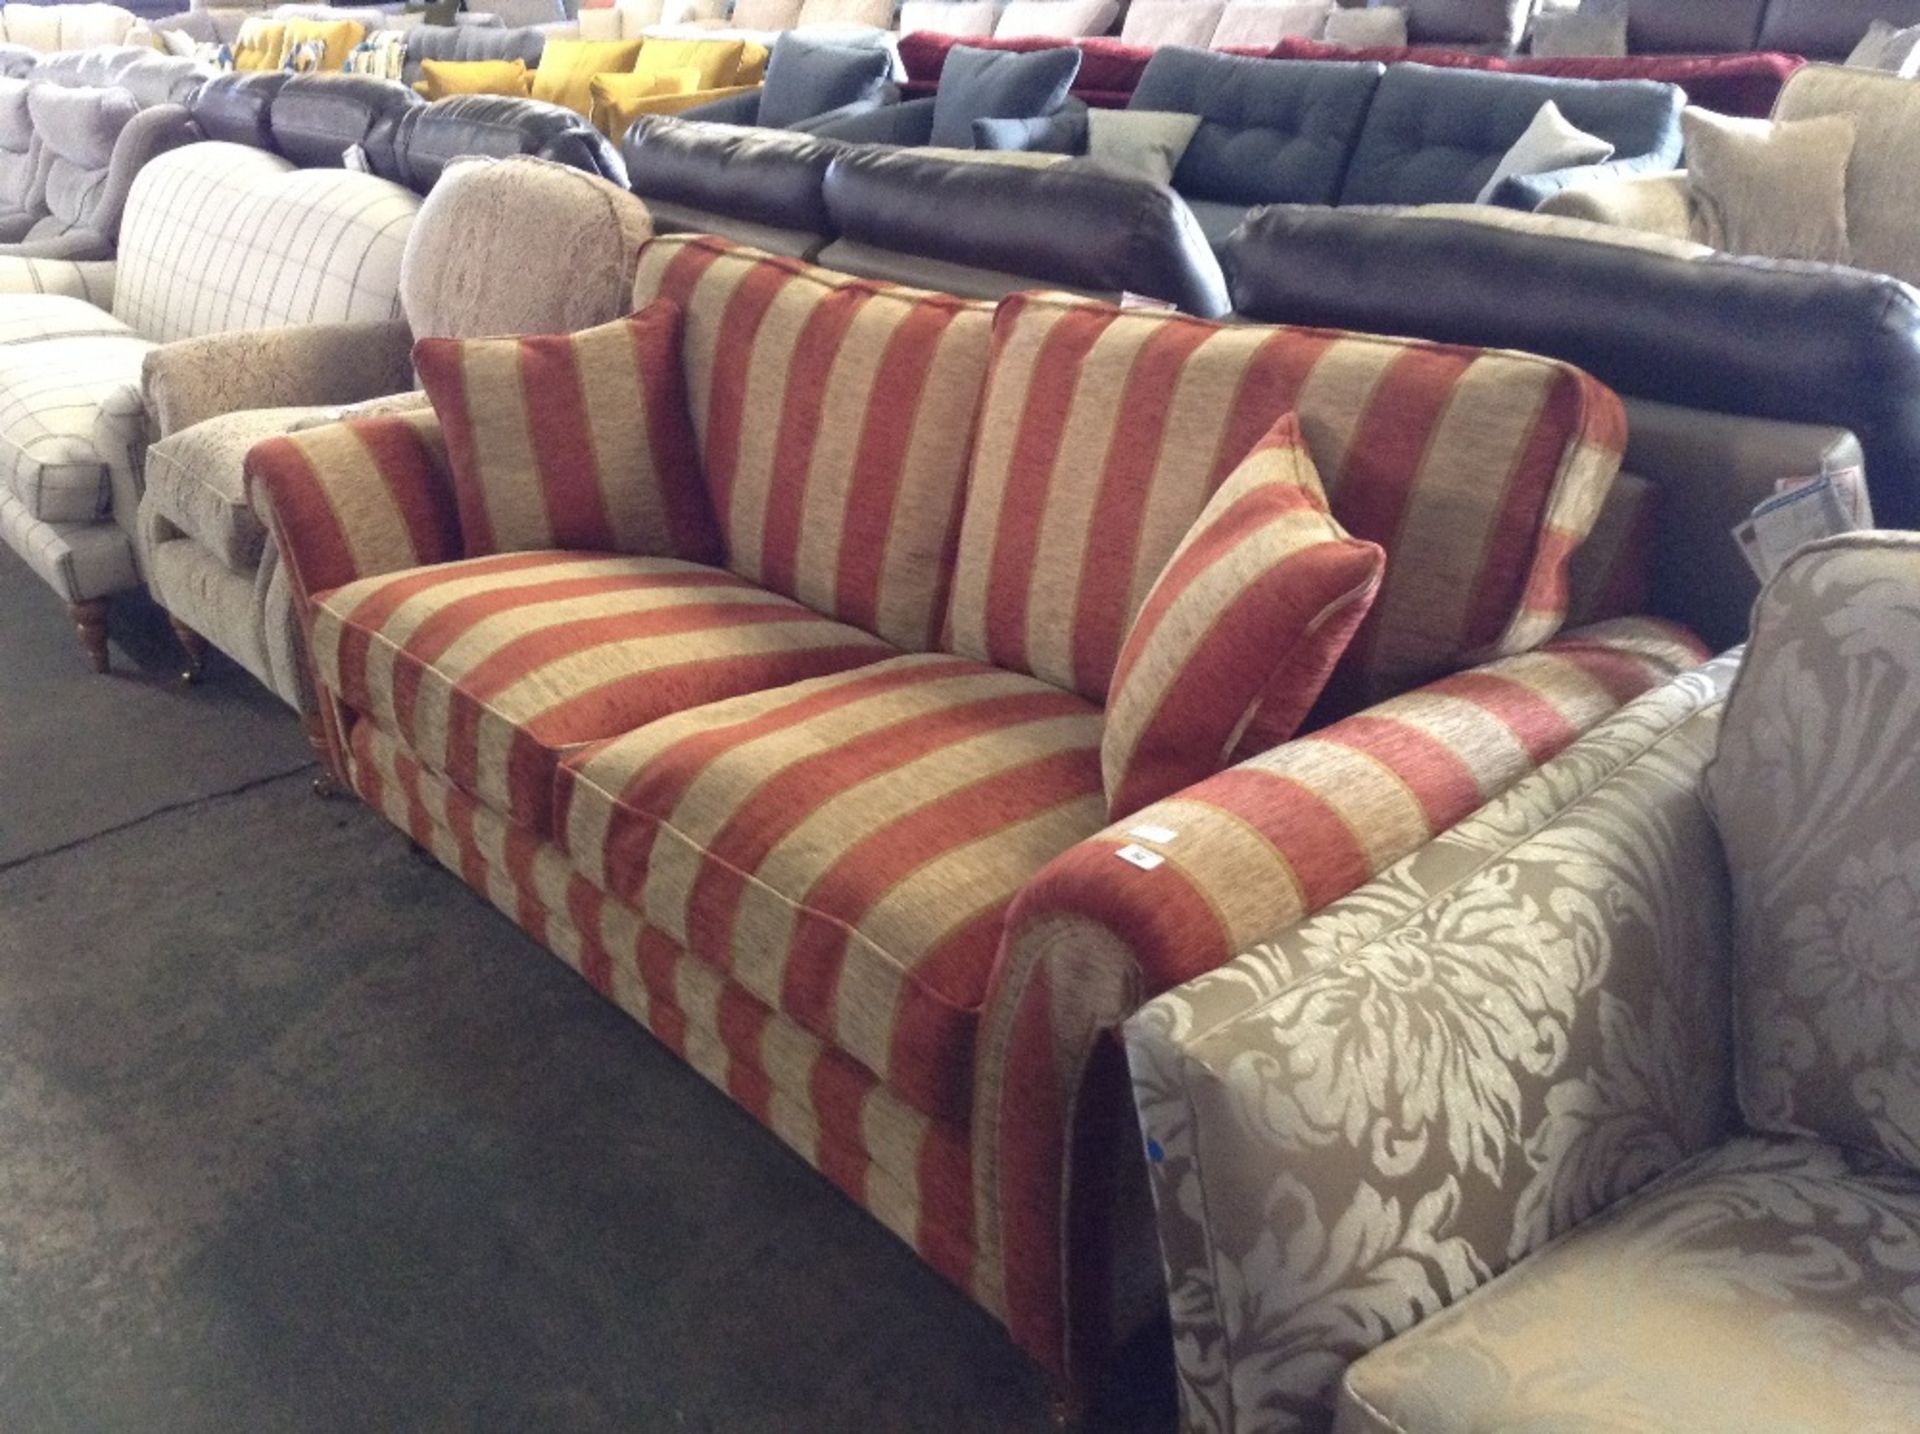 RED AND GOLD STRIPED 2 SEATER SOFA (TR0001012 WO02